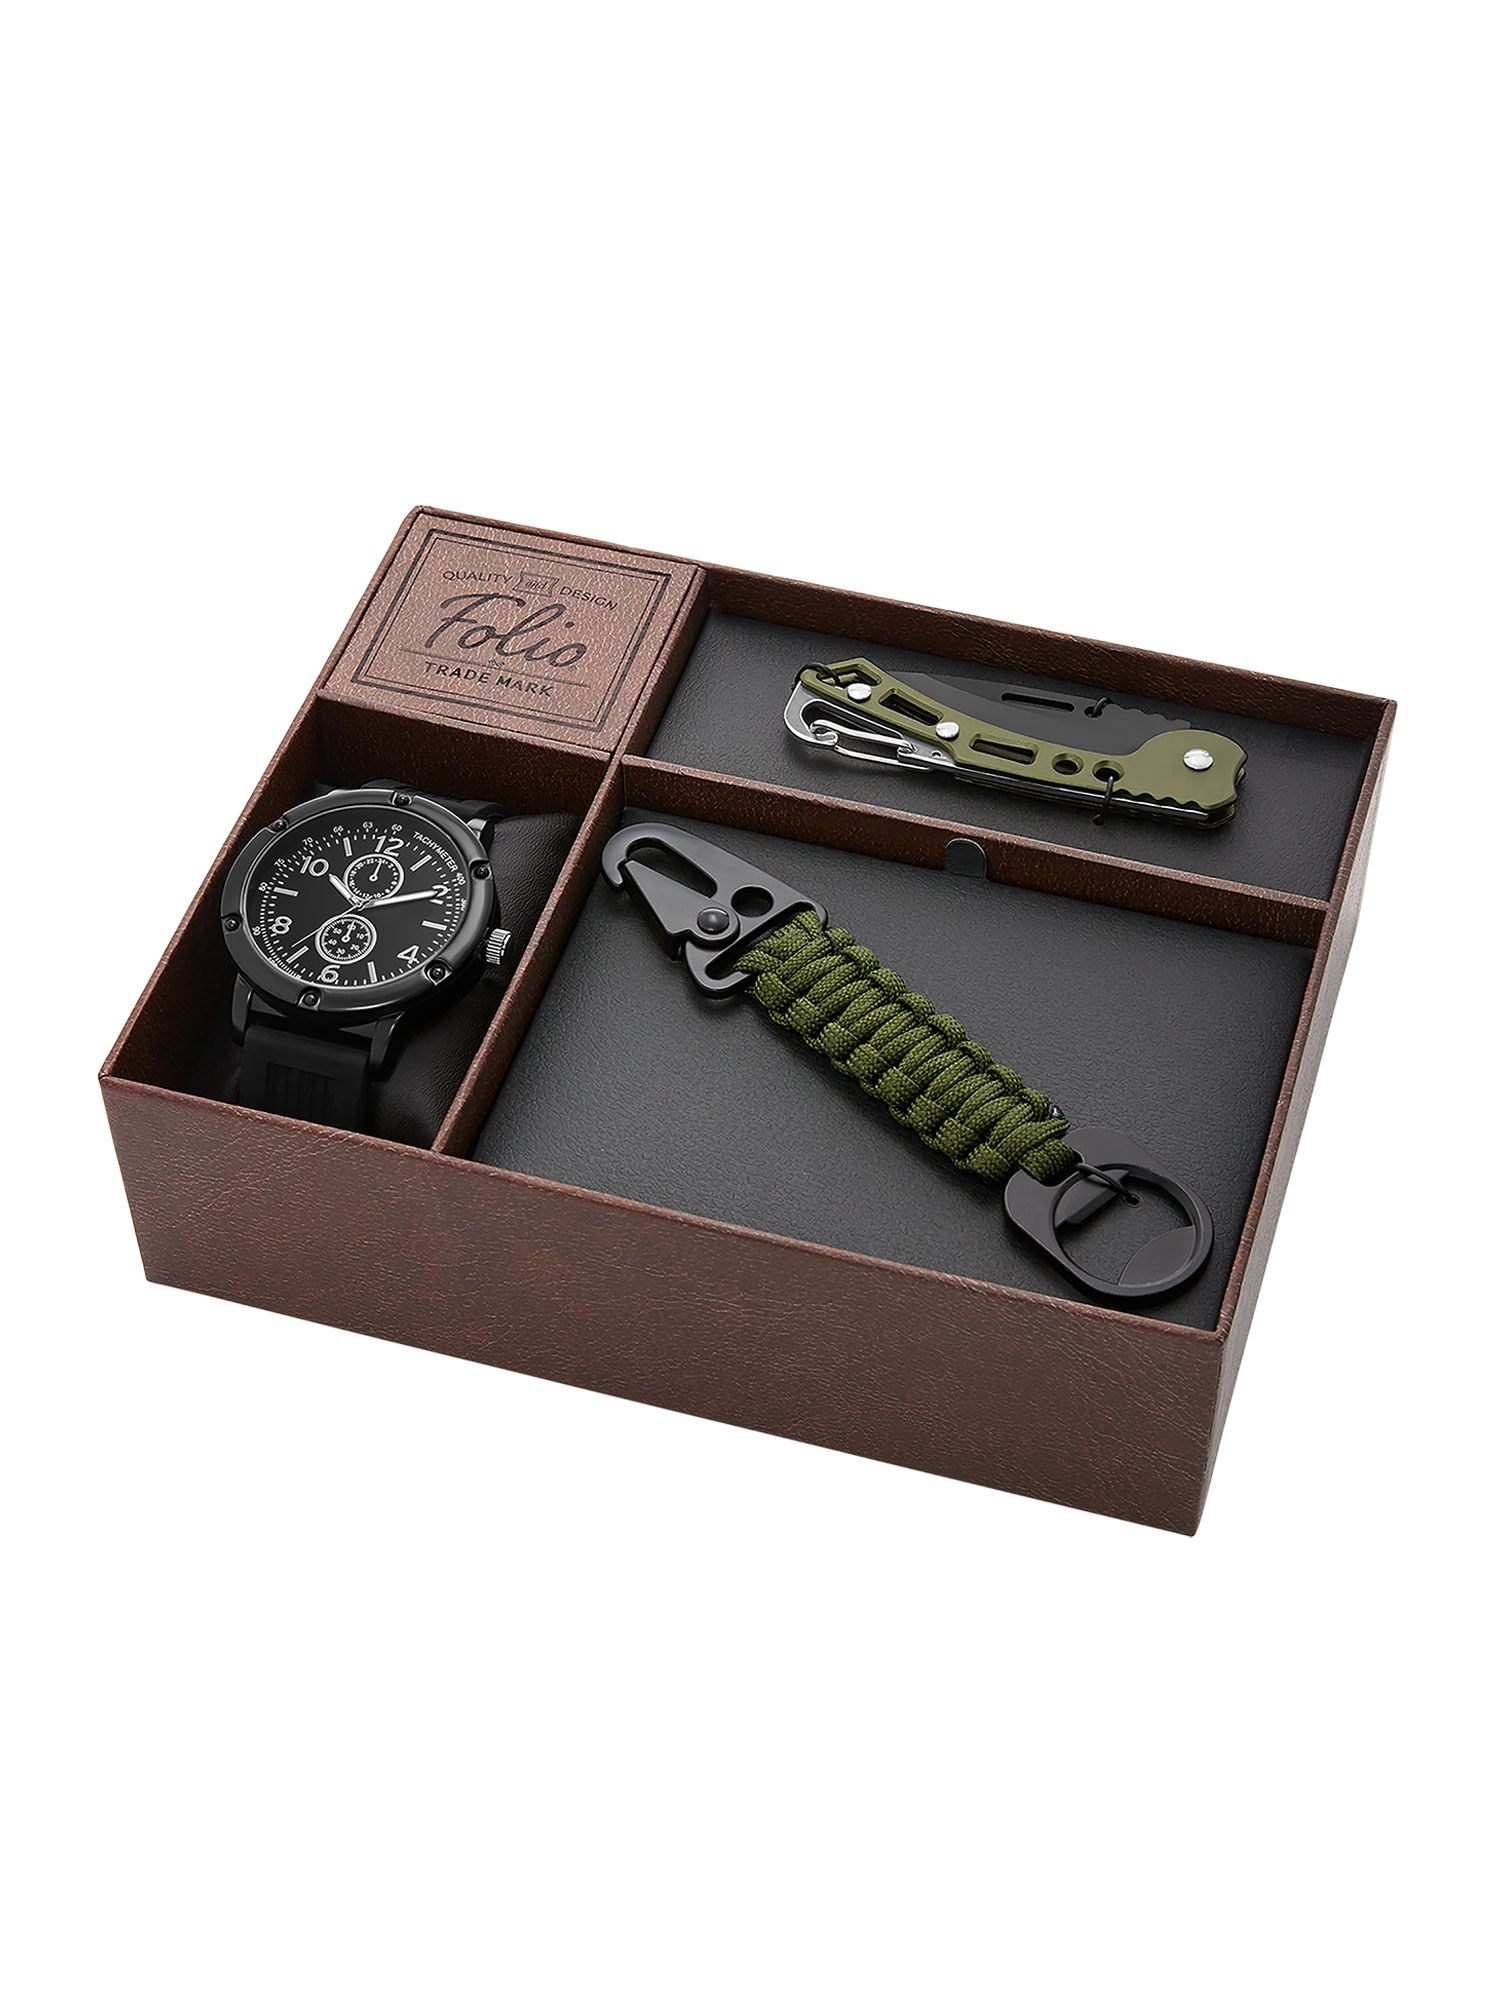 Folio Men's Matte Black Round Analog Watch with Black Silicone Strap, Green Braided Rope Bracelet and Green Multi-tool Gift Set (FMDAL1145) - image 2 of 3